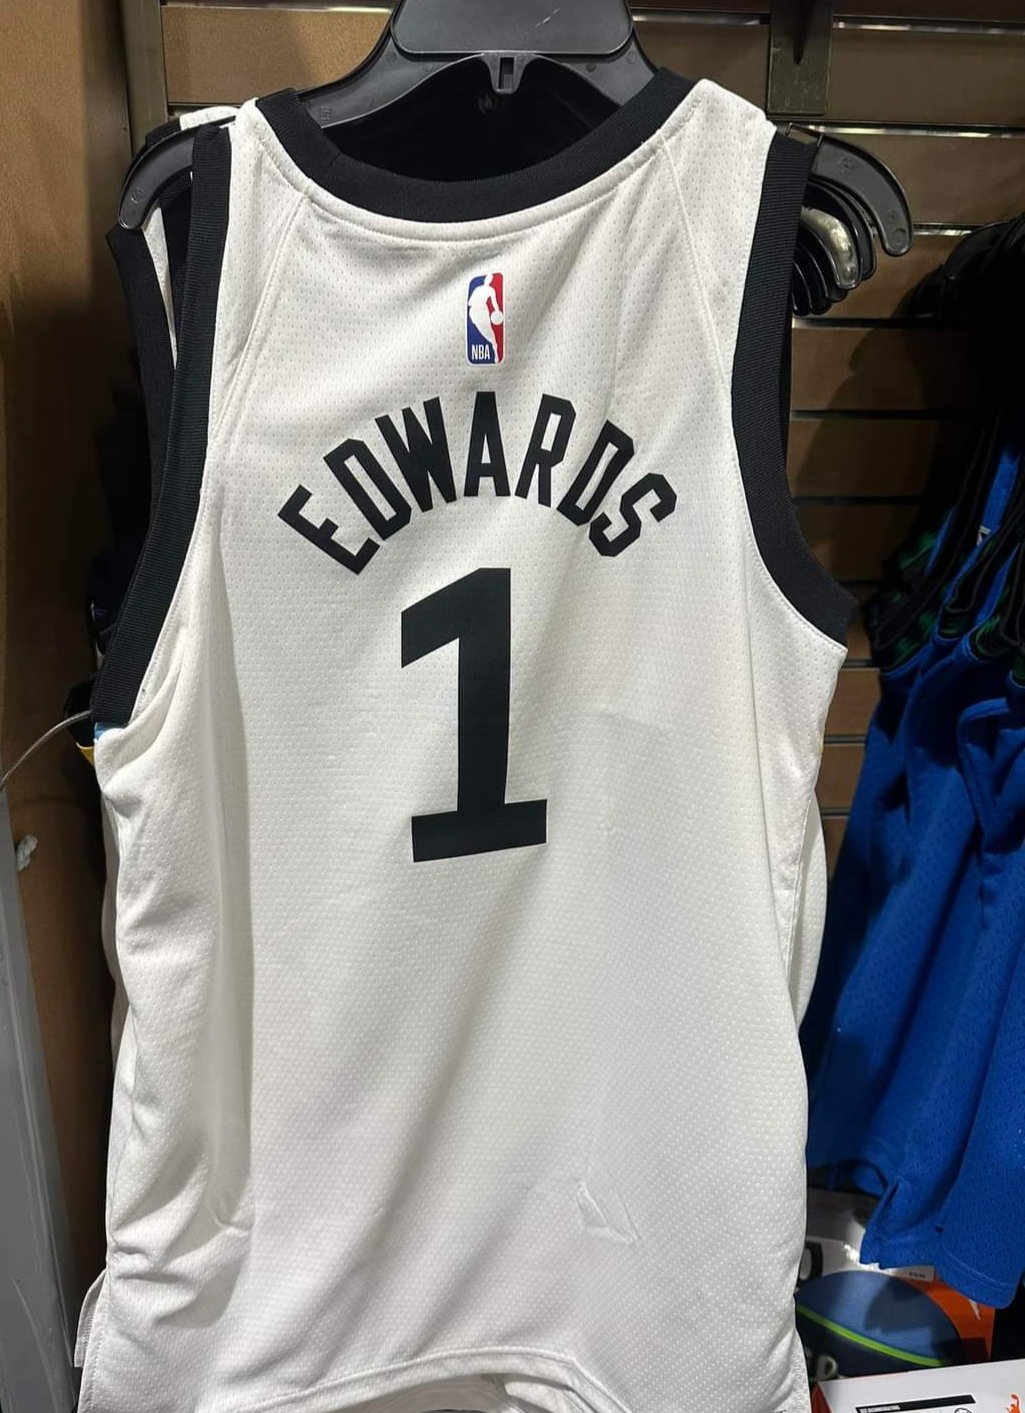 NBA Offseason: Making Sense of the Wolves' City Edition Jersey Leaks -  Canis Hoopus